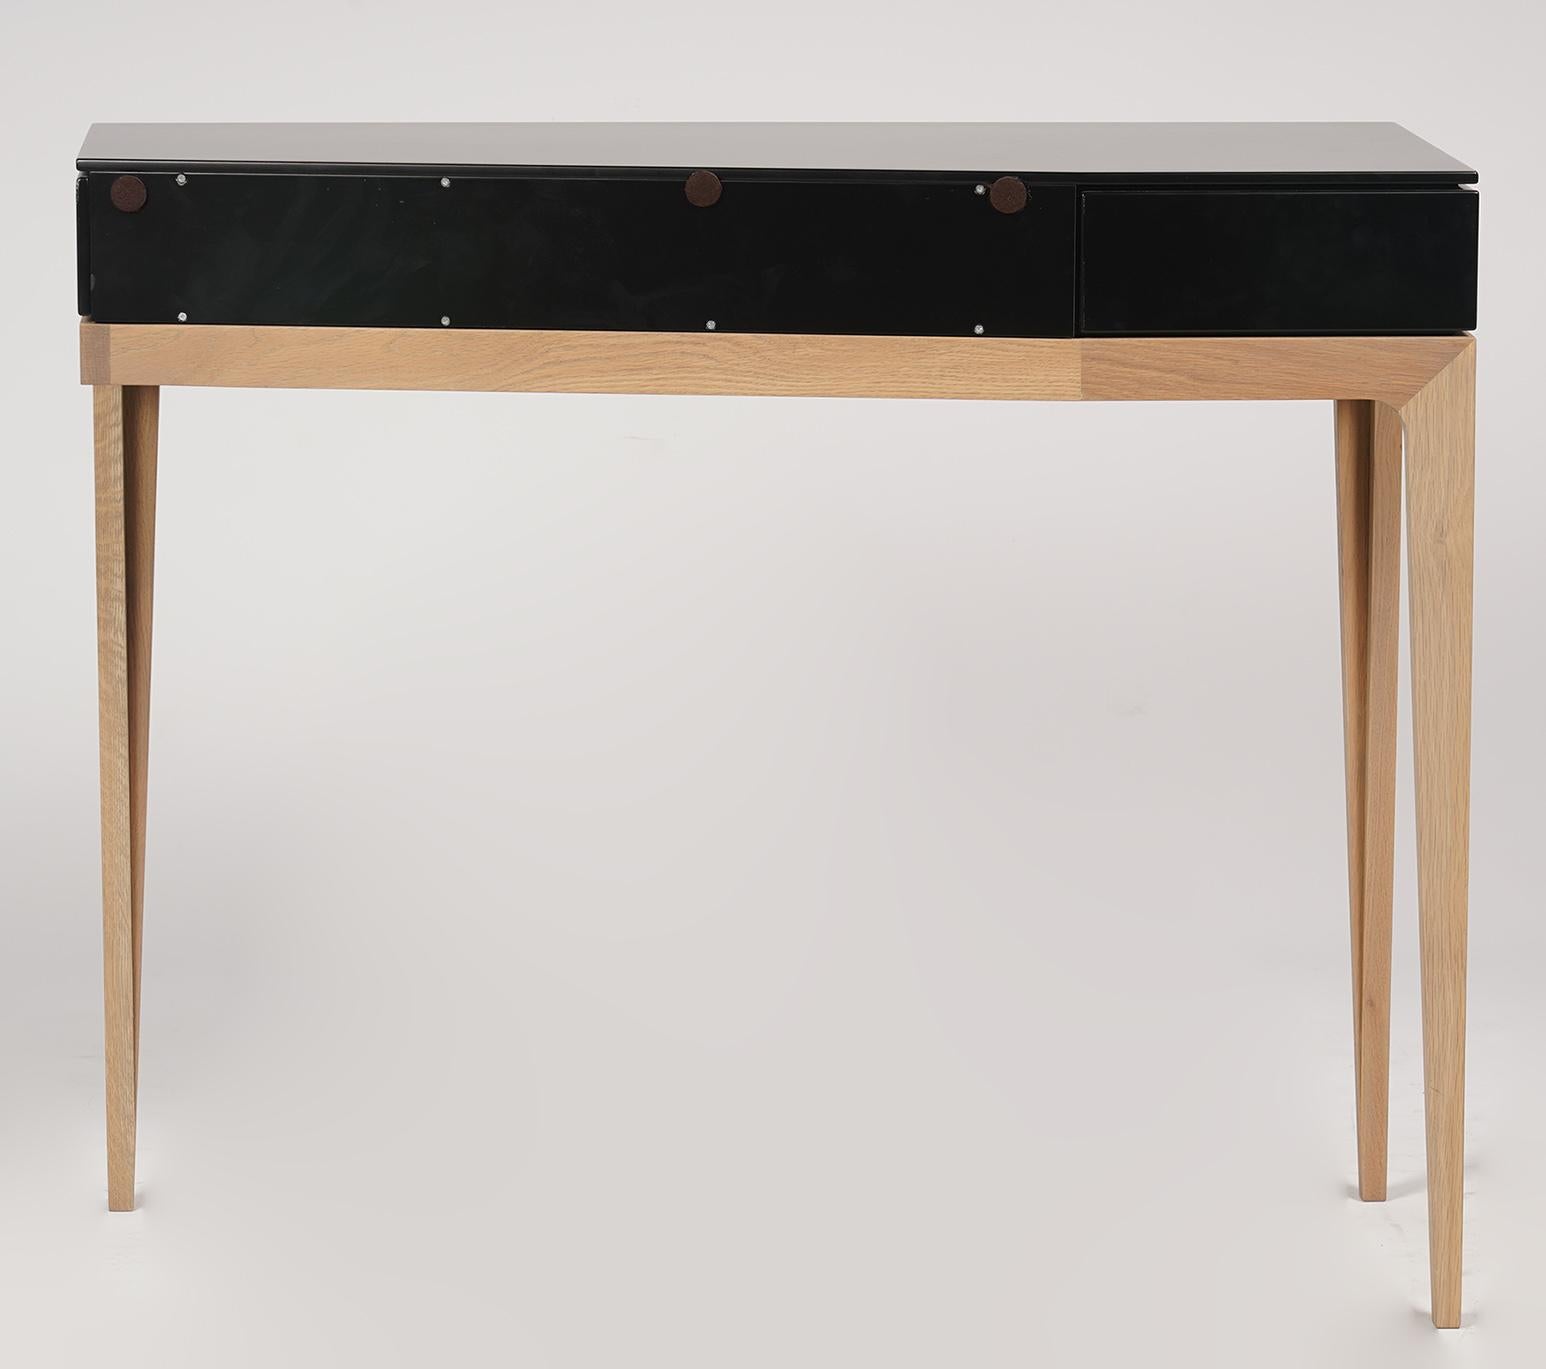 Wood Sandra Demuth for Roche Bobois 'Moved' Console Table 3 Legs